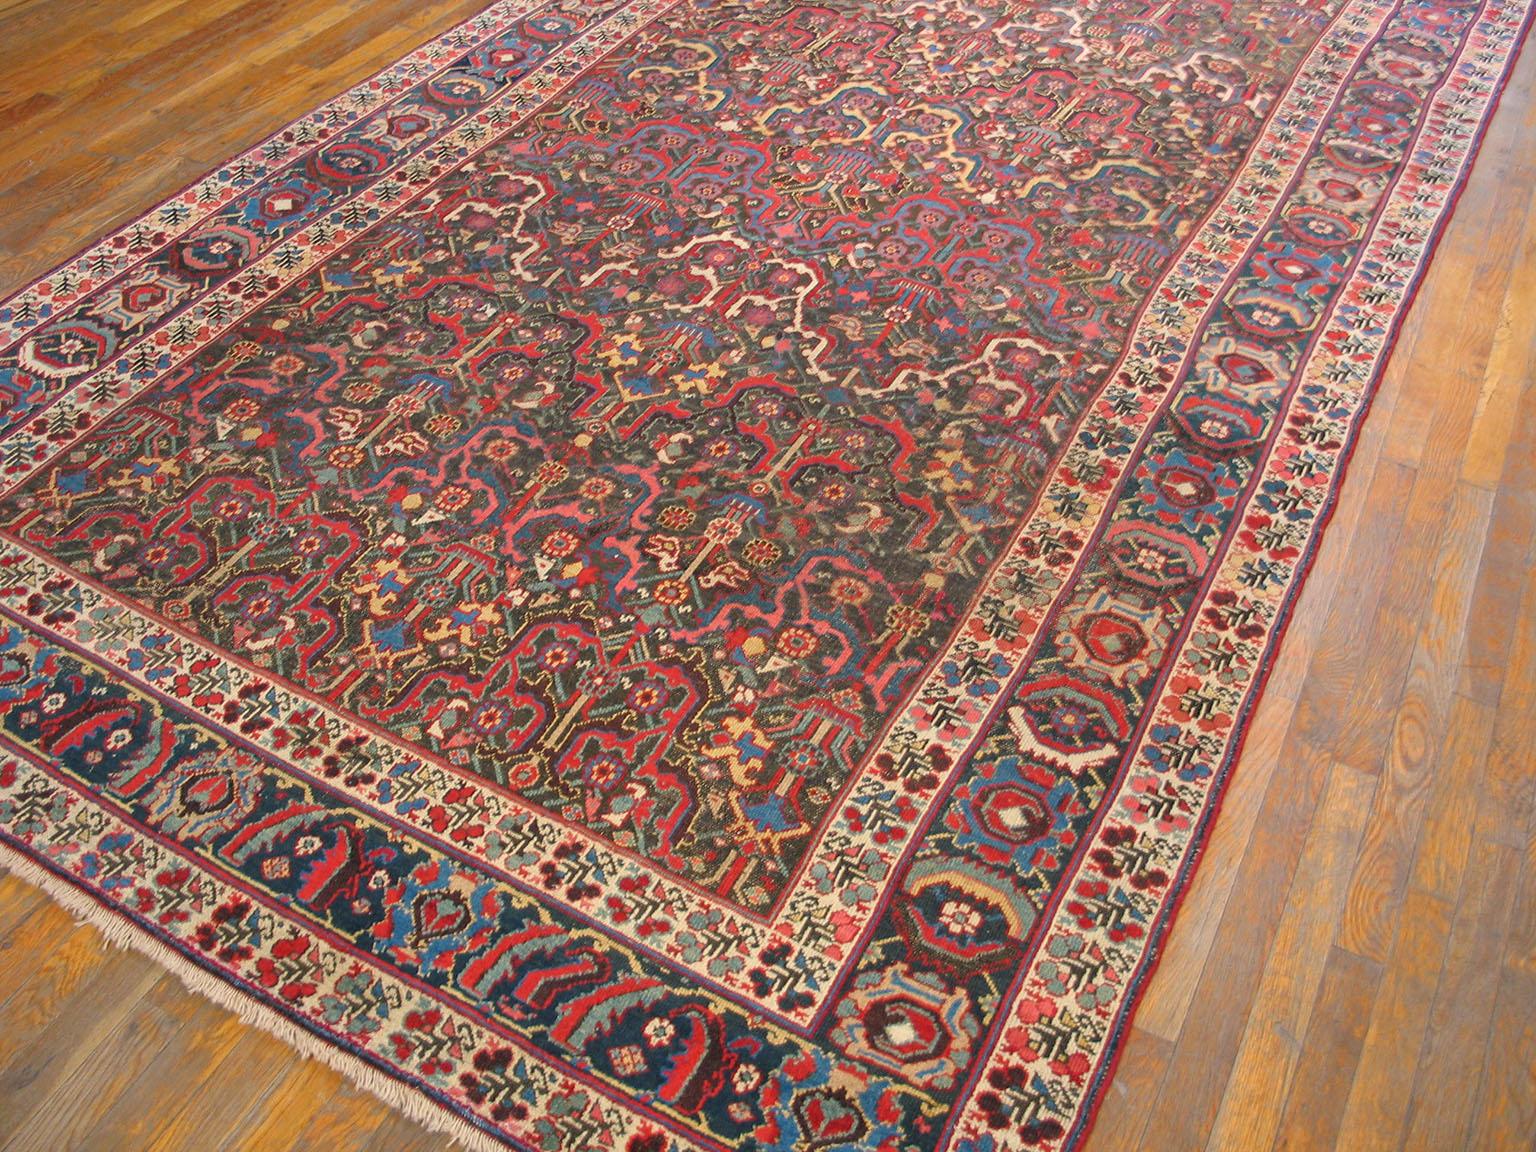 
Northwest Persian Gallery Carpet
Probably Kurdistan, Possibly Kolyai
3rd quarter 18th Century
This antique gallery format carpet is a particularly fine example of a select group of Kurdish carpets accurately interpreting a 17th century Mughal